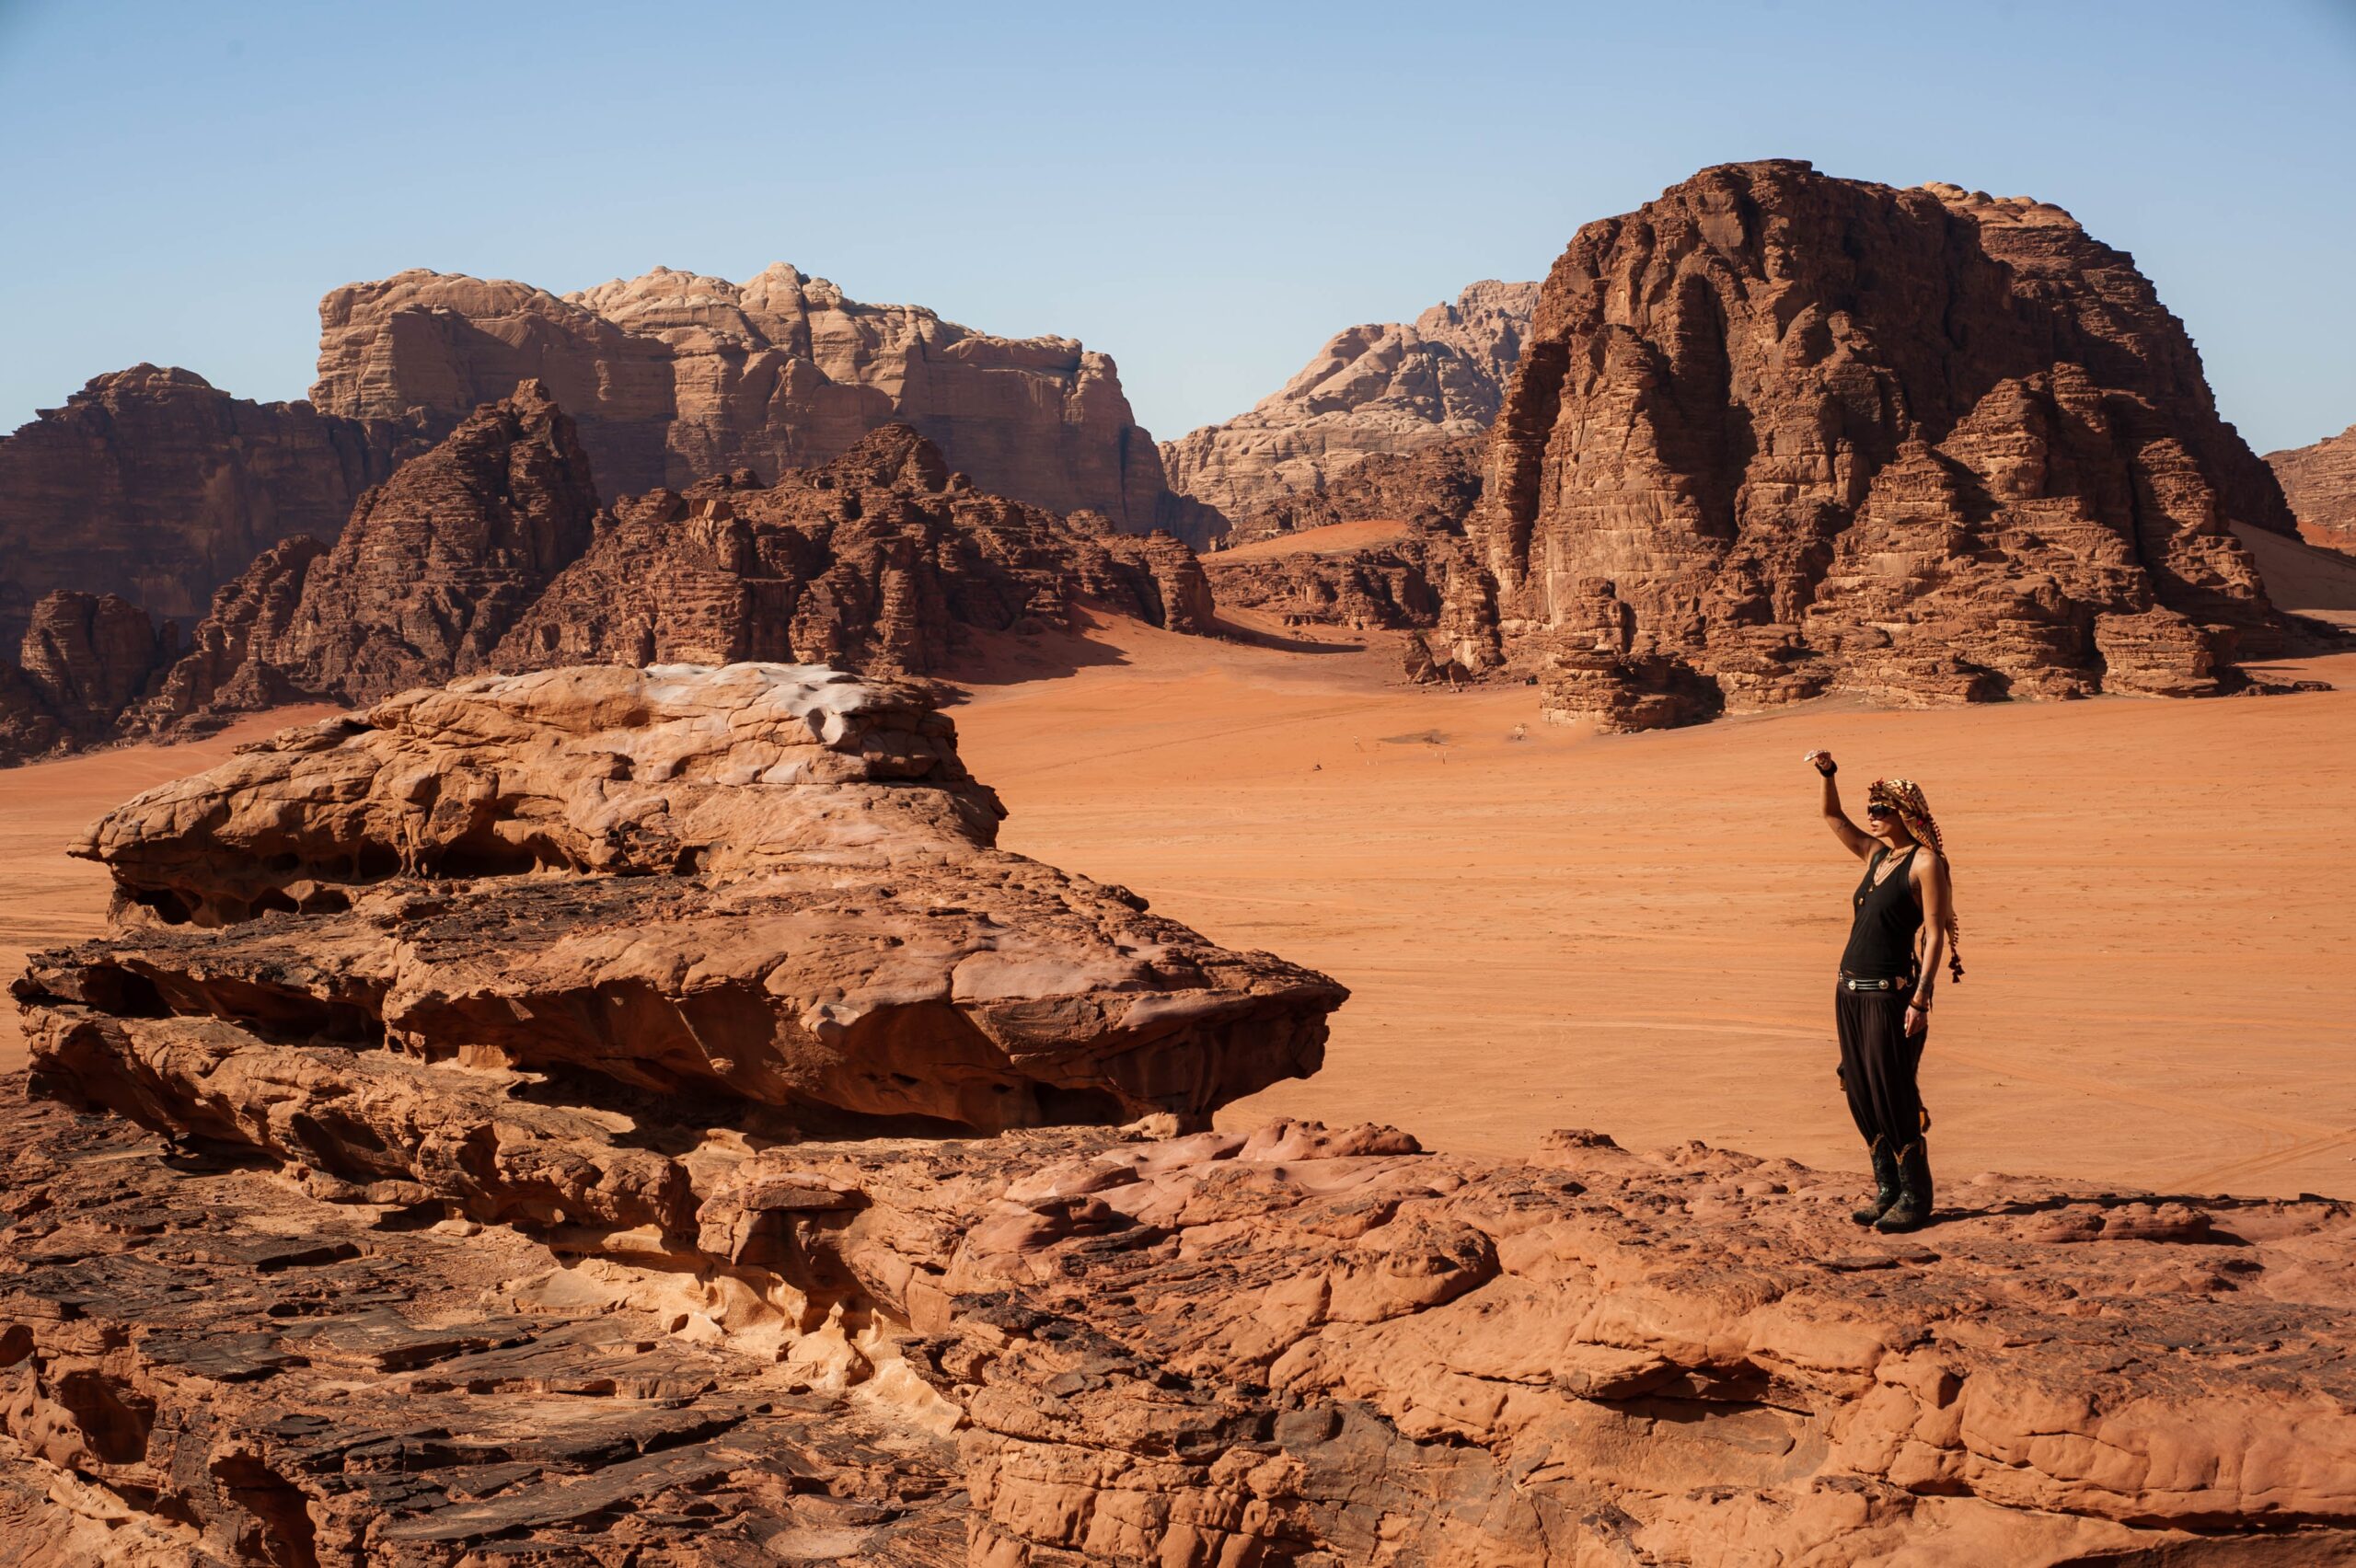 spectacular desert wilderness in Jordan – the magnificent landscape – “Wadi Rum”, also known as the Valley of the Moon